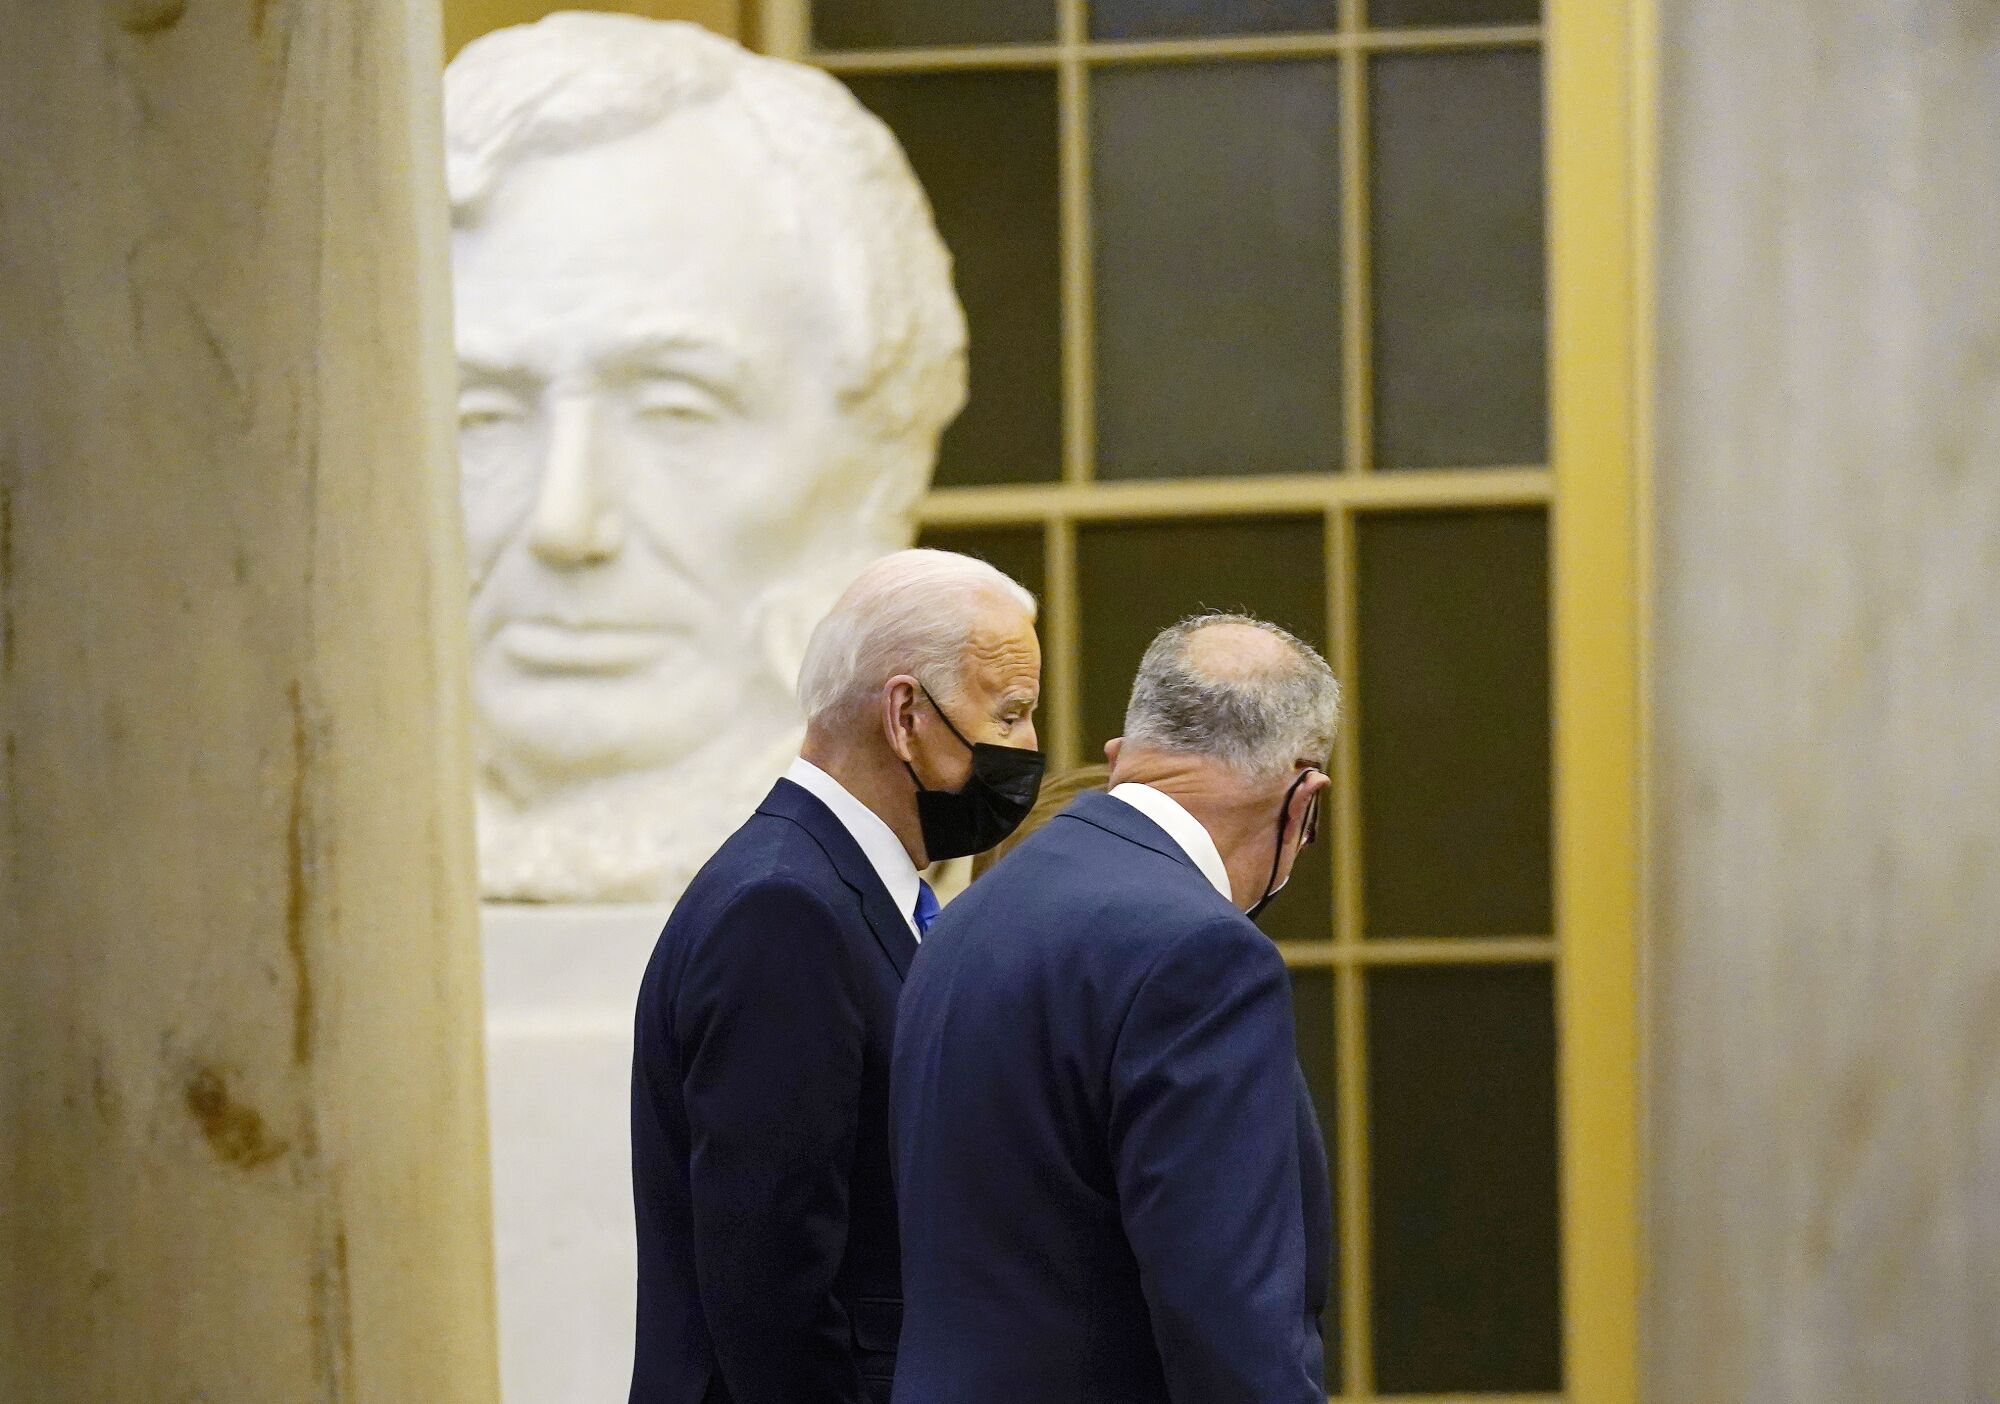 President Biden walks with Senate Majority Leader Charles E. Schumer past a statue of Abraham Lincoln at the Capitol